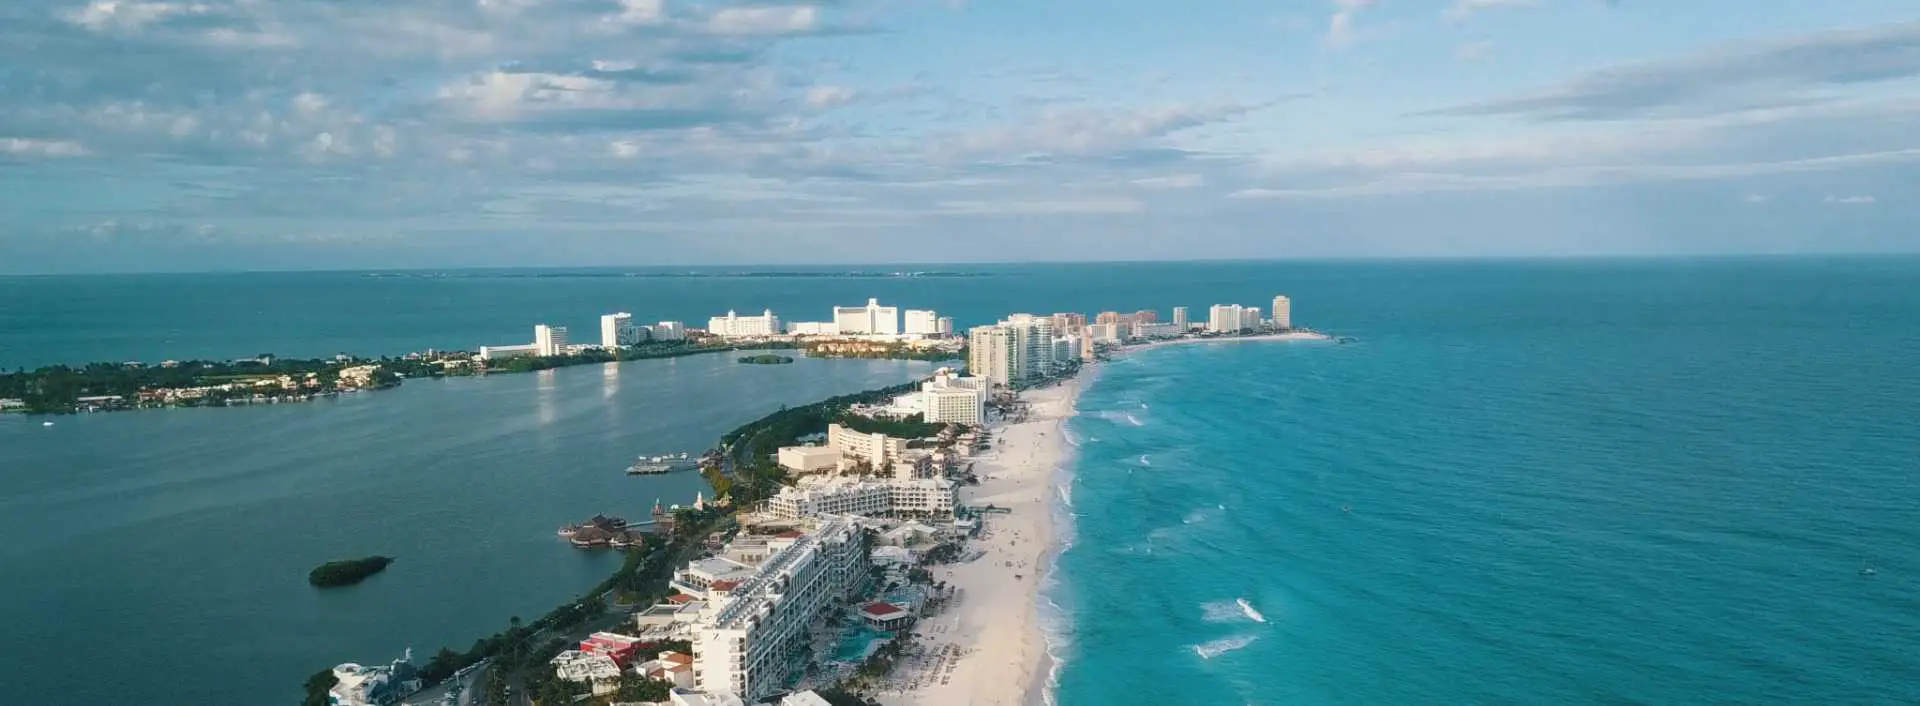 Aerial view of Cancun Mexico along the Mexican Caribbean